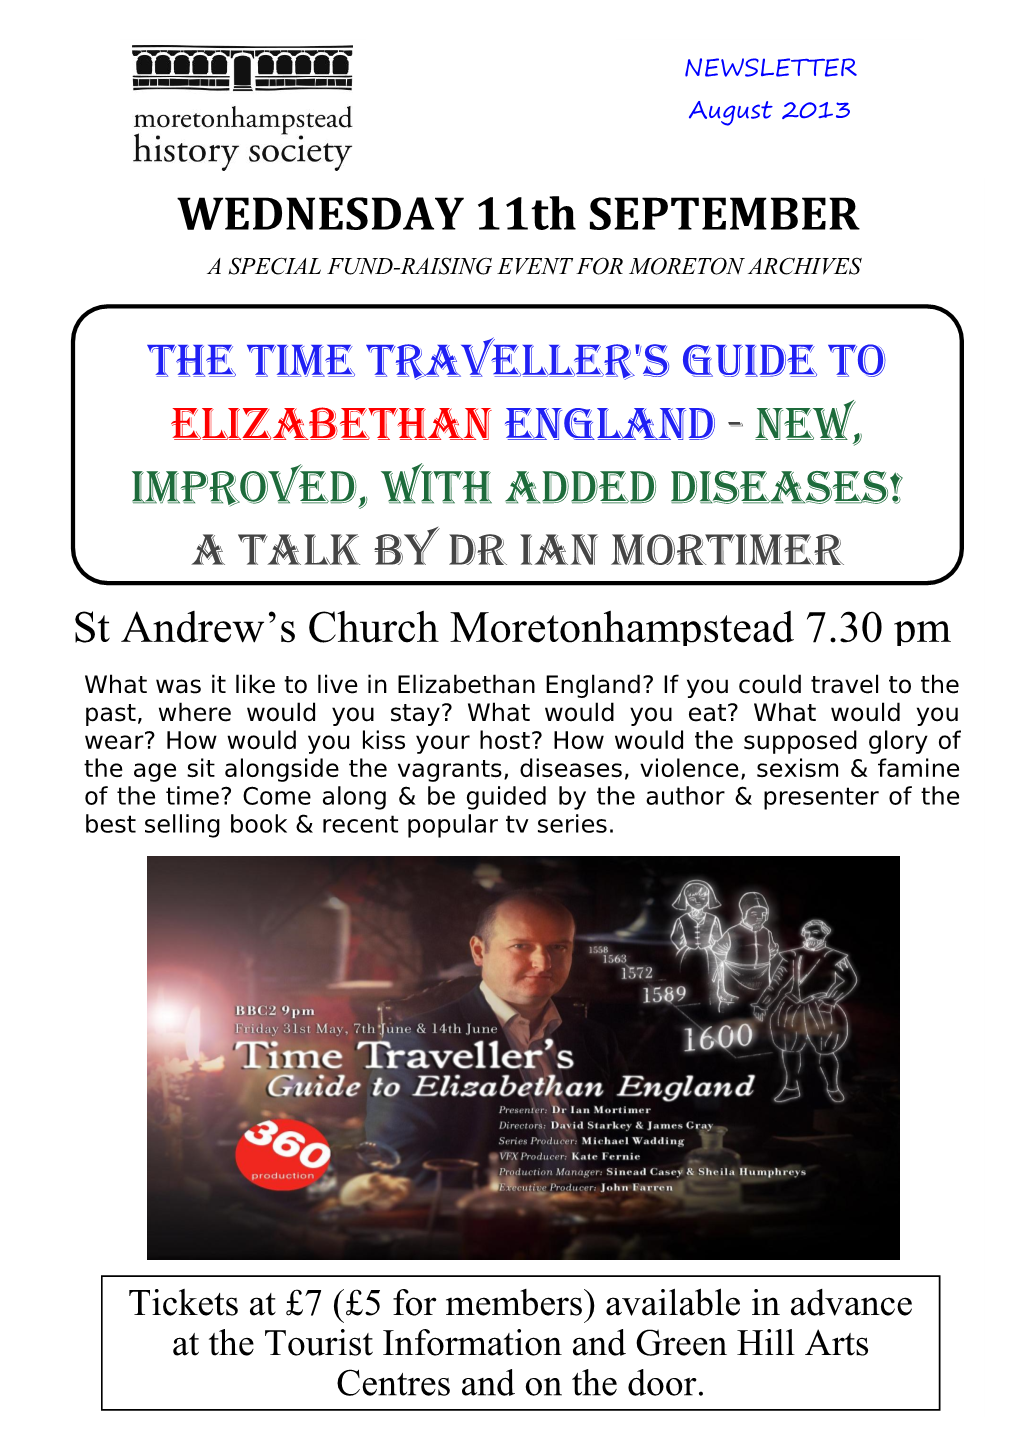 WEDNESDAY 11Th SEPTEMBER a SPECIAL FUND-RAISING EVENT for MORETON ARCHIVES